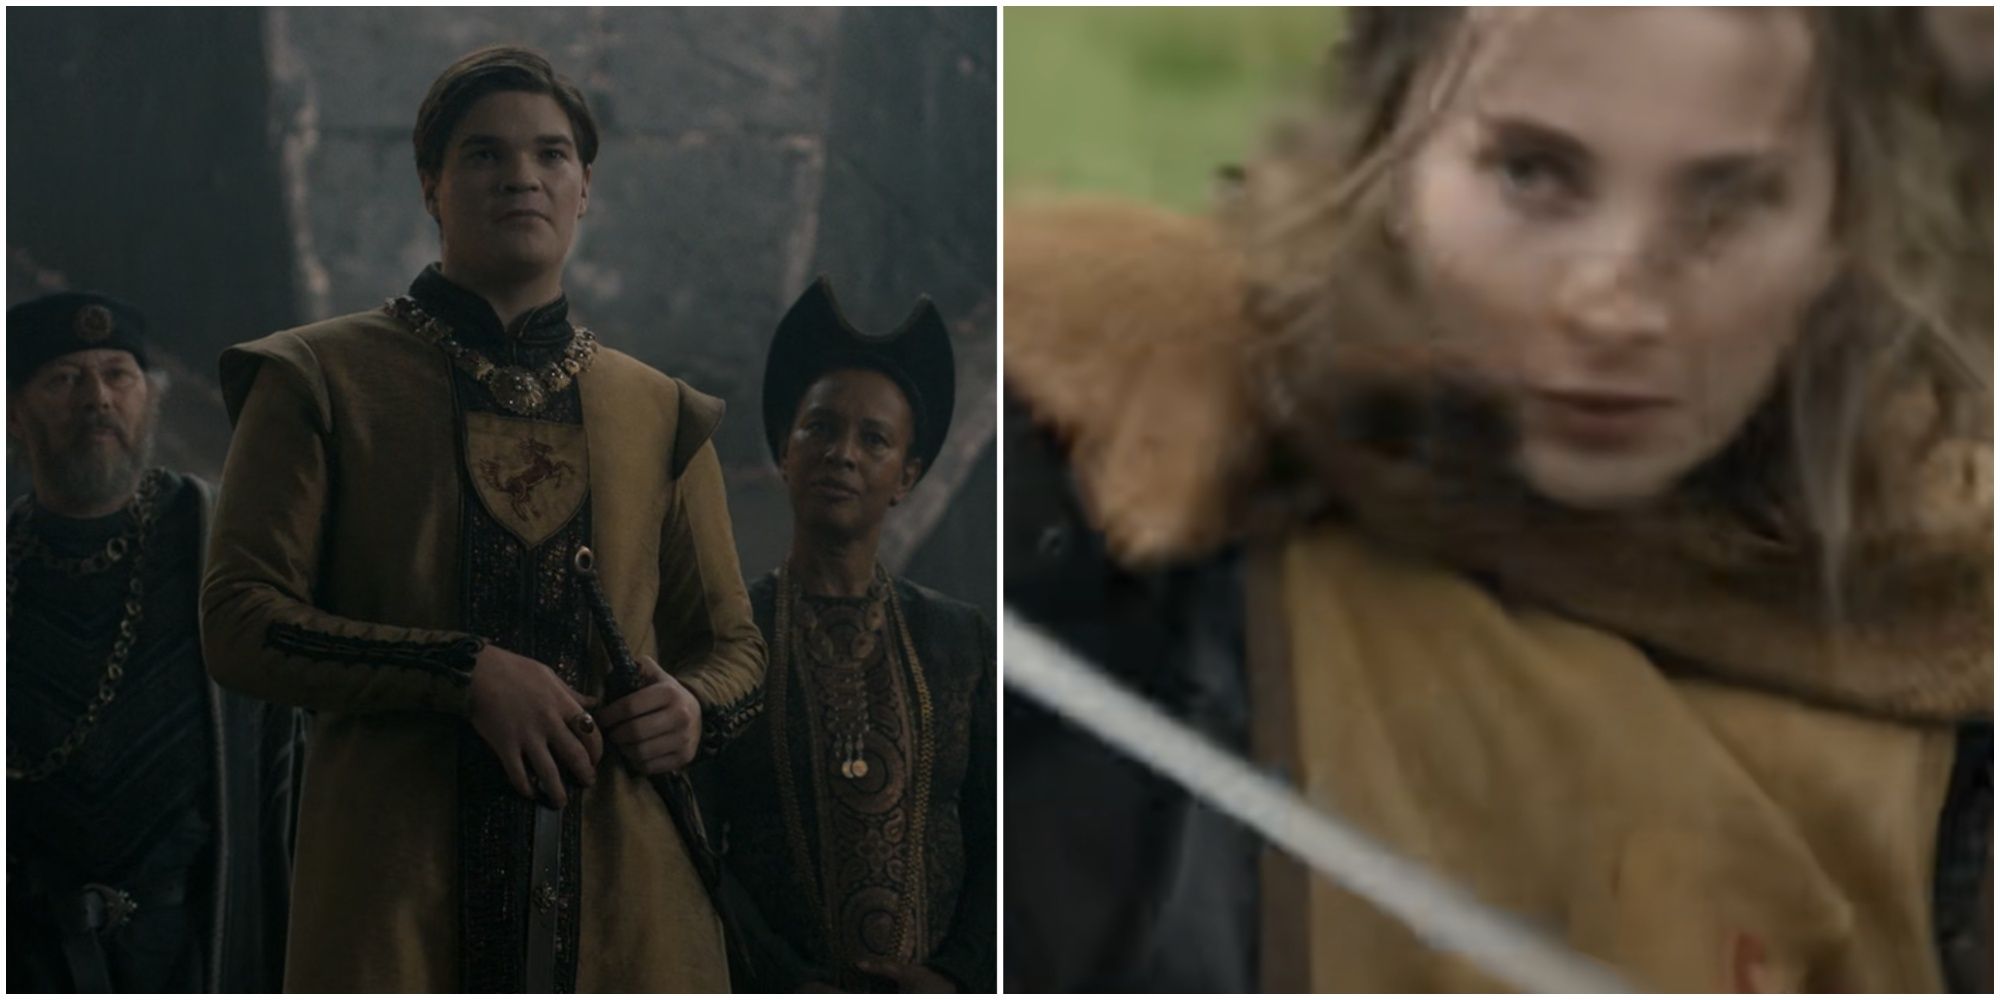 Split image of a member of House Bracken in House of the Dragon and a Bracken soldier in House of the Dragon season 2 teaser trailer.